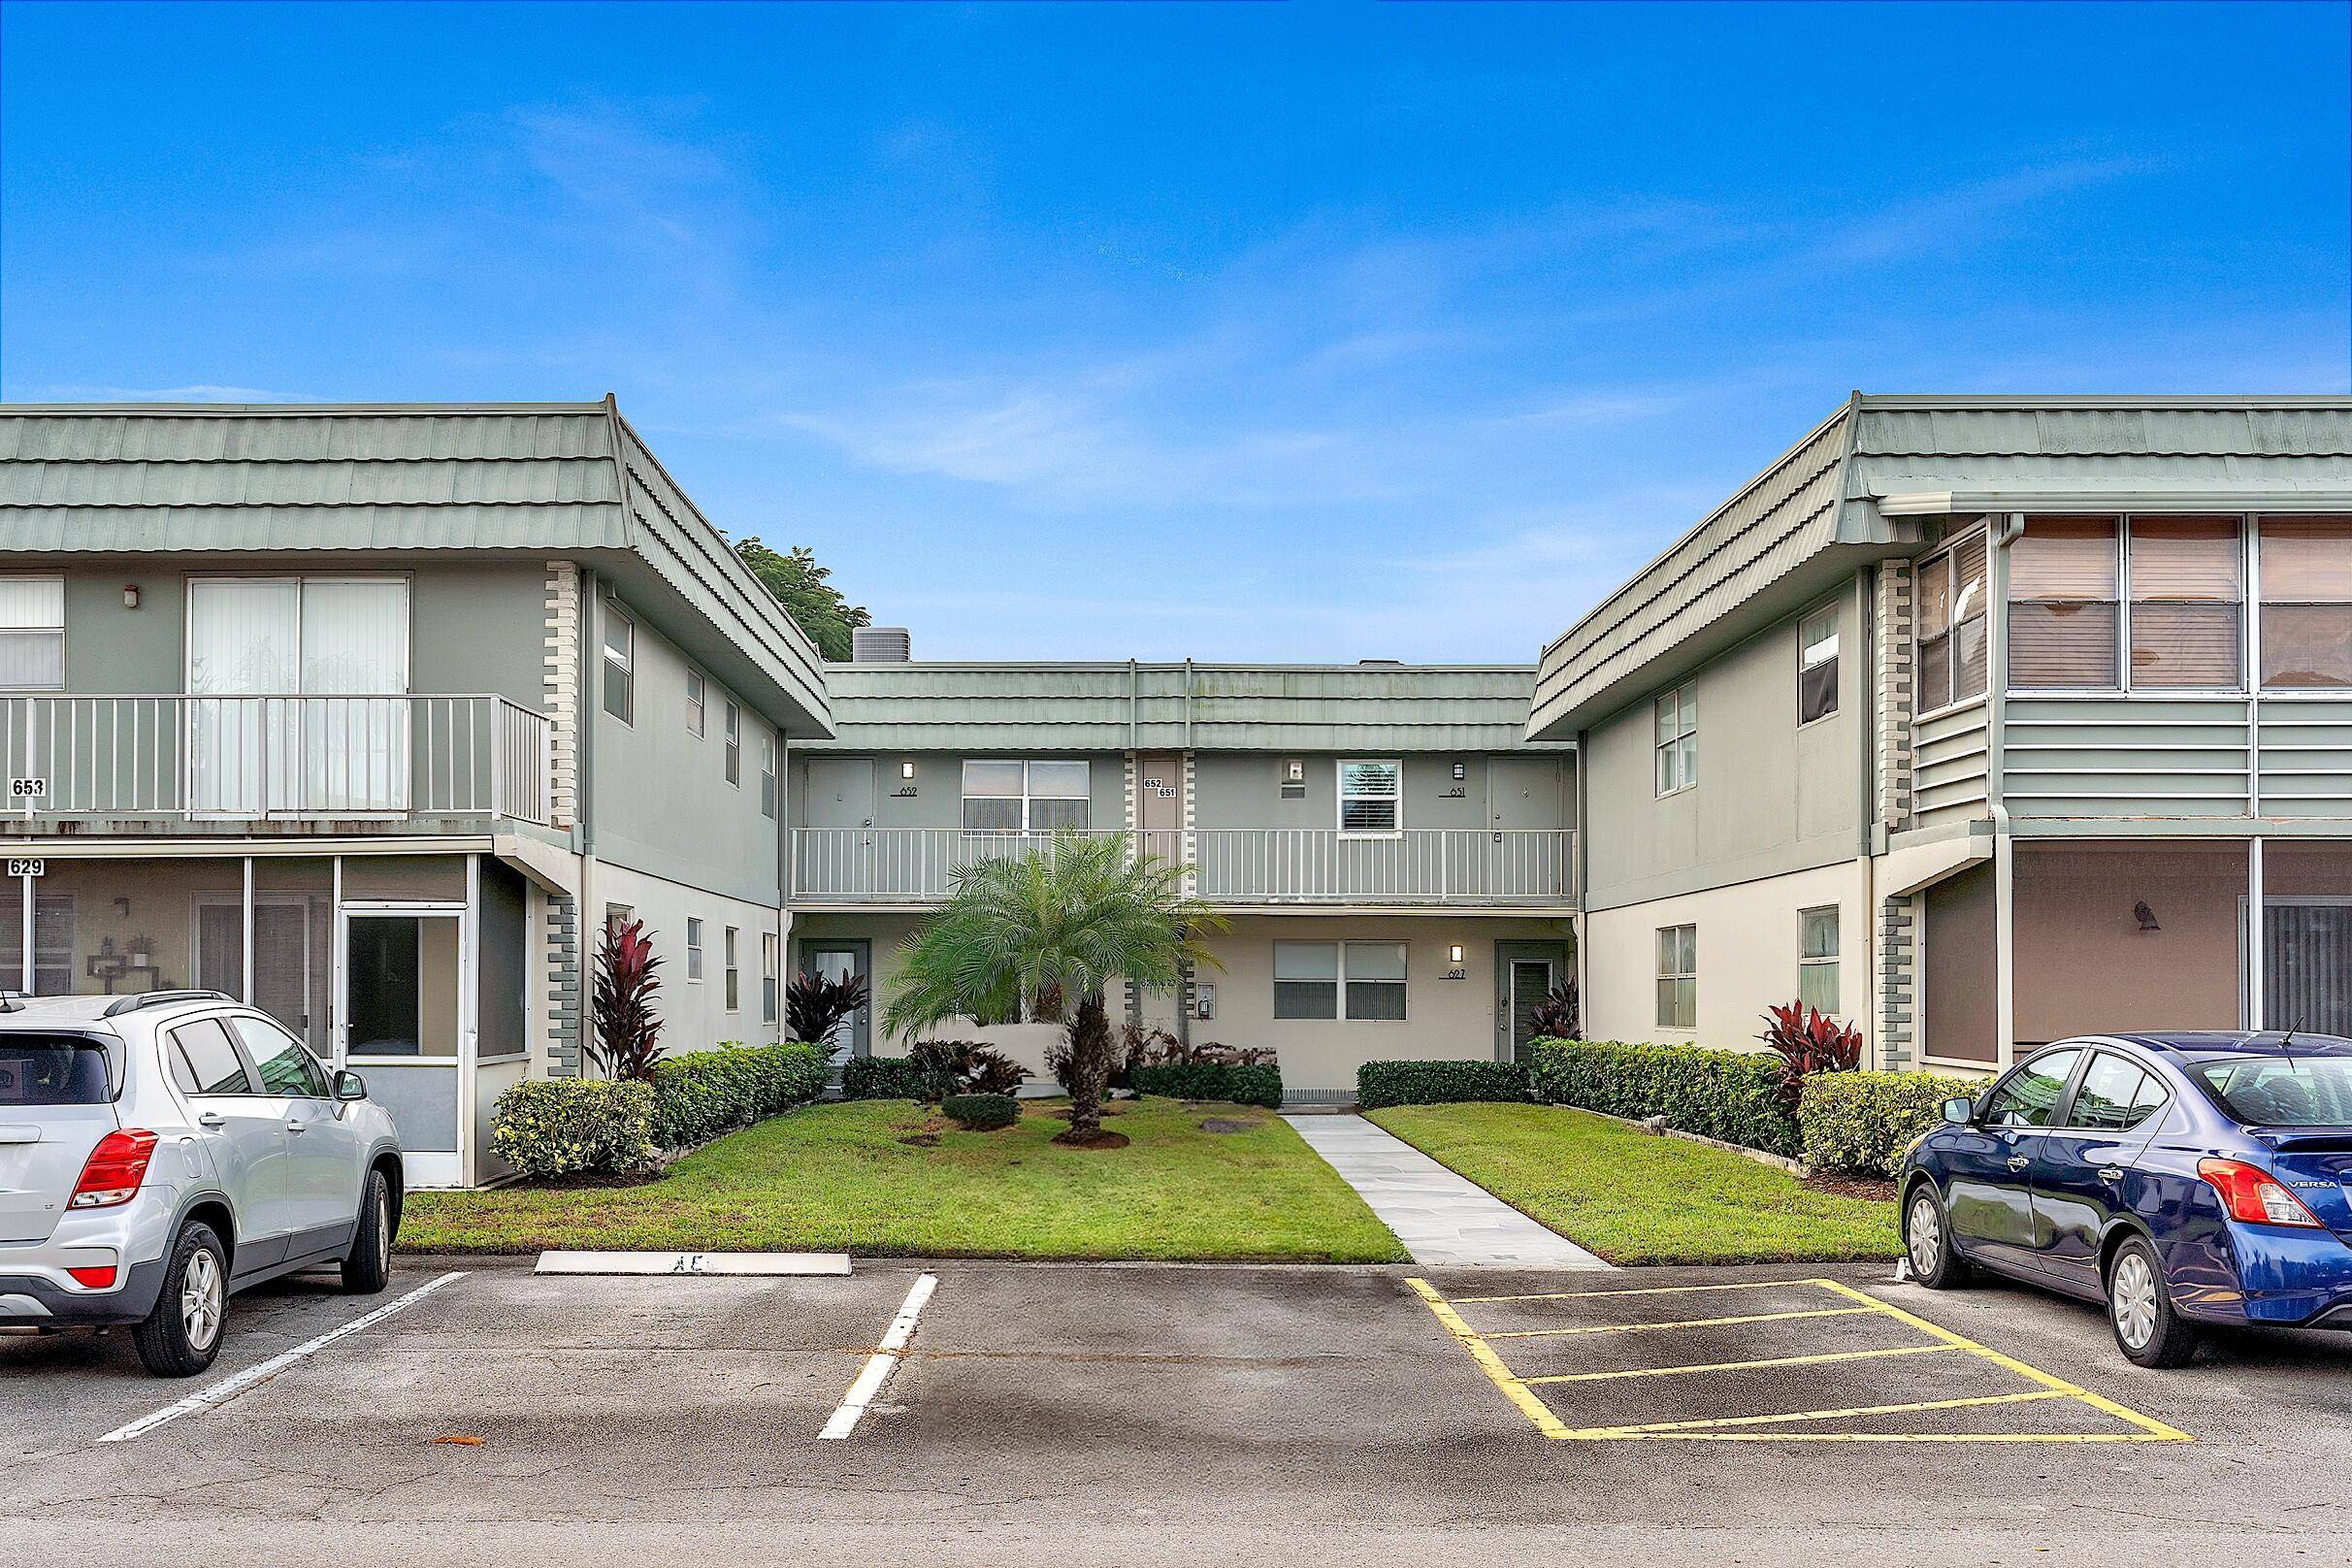 Lovely second floor unit featuring 2 bedrooms, 2 baths, a screened in patio, and in unit washer and dryer.